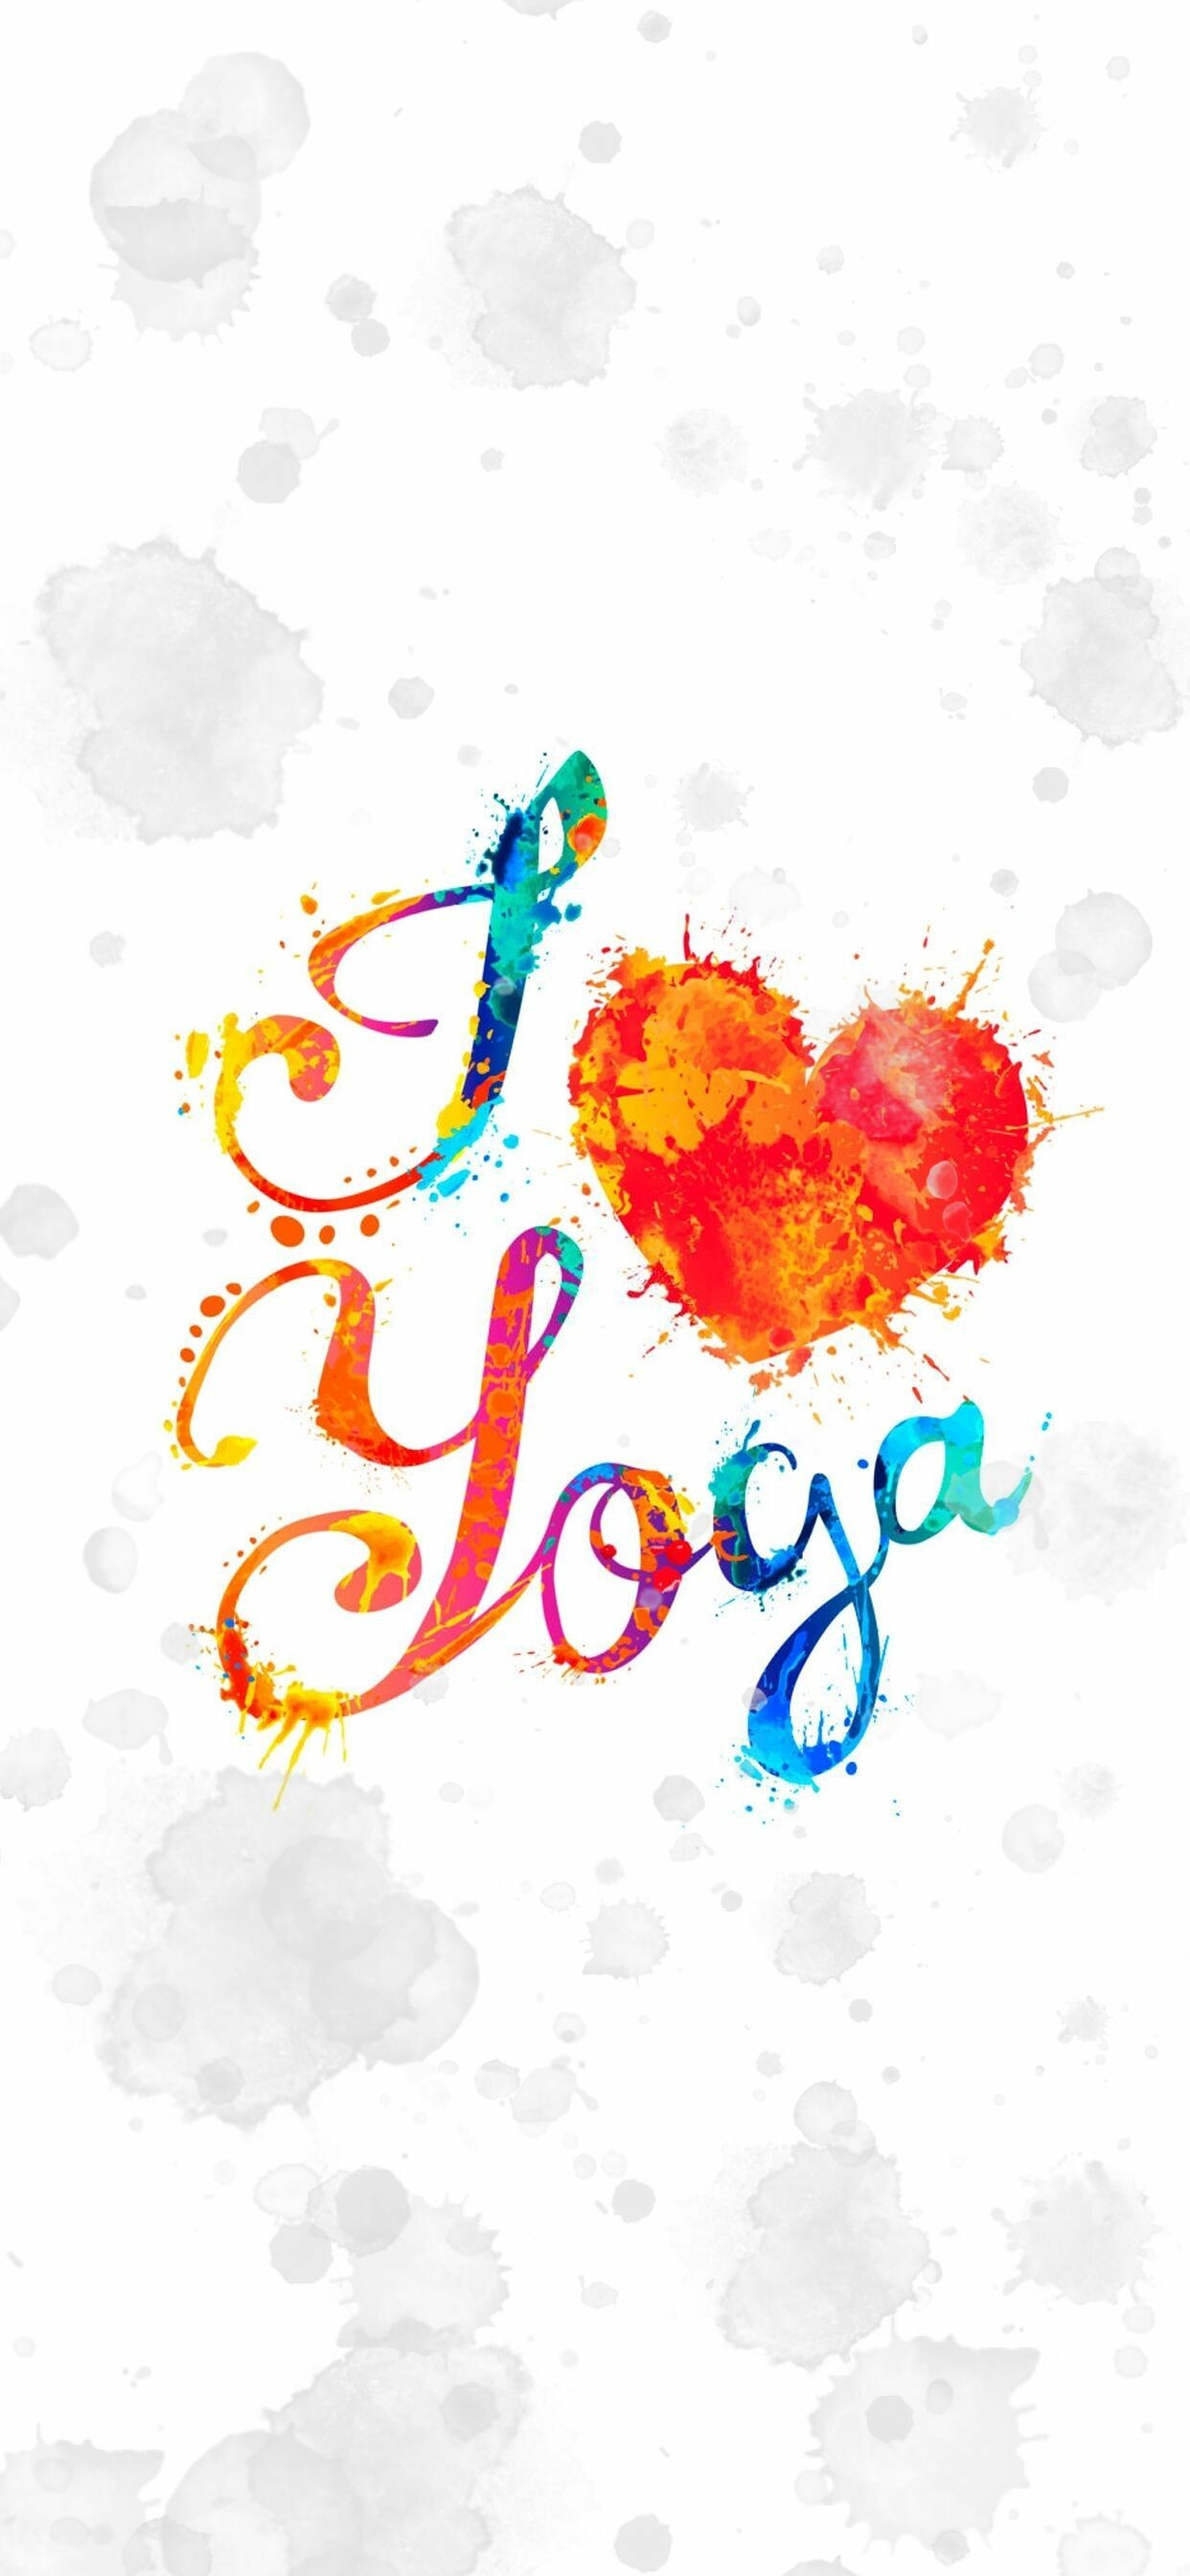 Yoga: A group of physical, mental, and spiritual practices or disciplines which originated in ancient India. 1250x2690 HD Wallpaper.